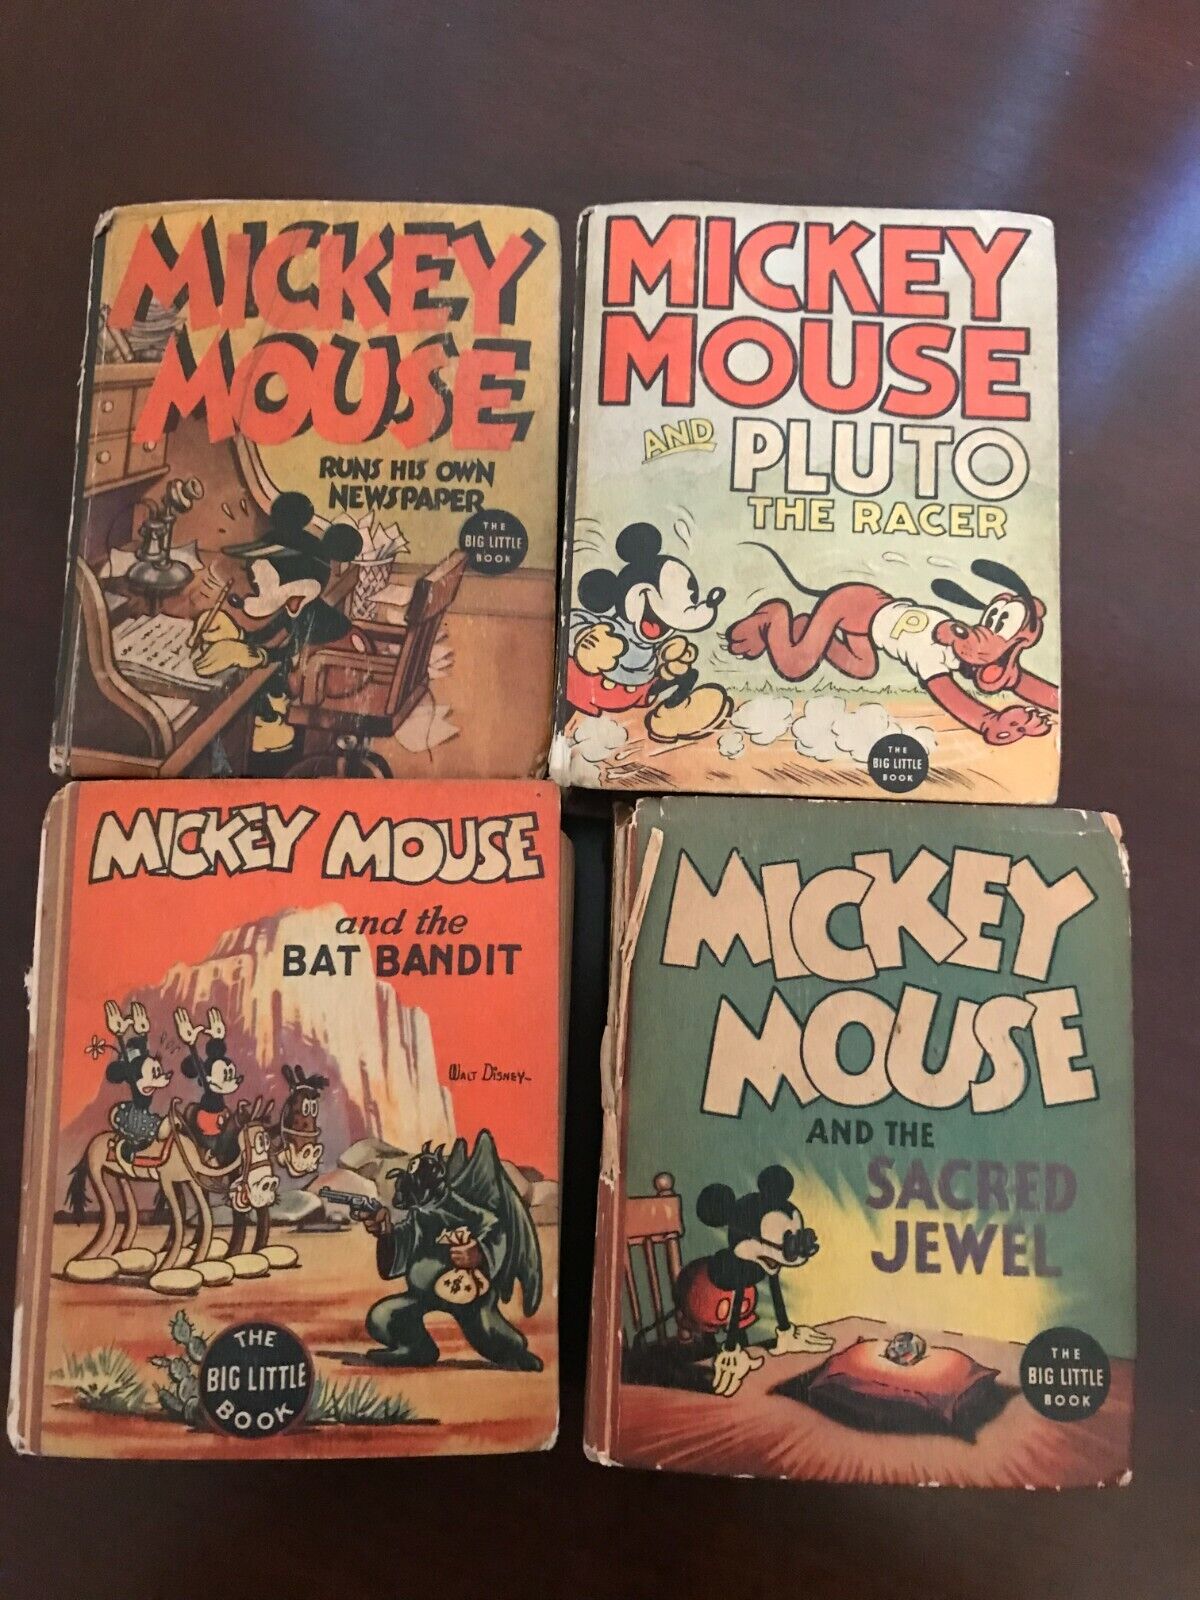 Disney vintage books - The Big Little Book featuring Mickey Mouse Без бренда